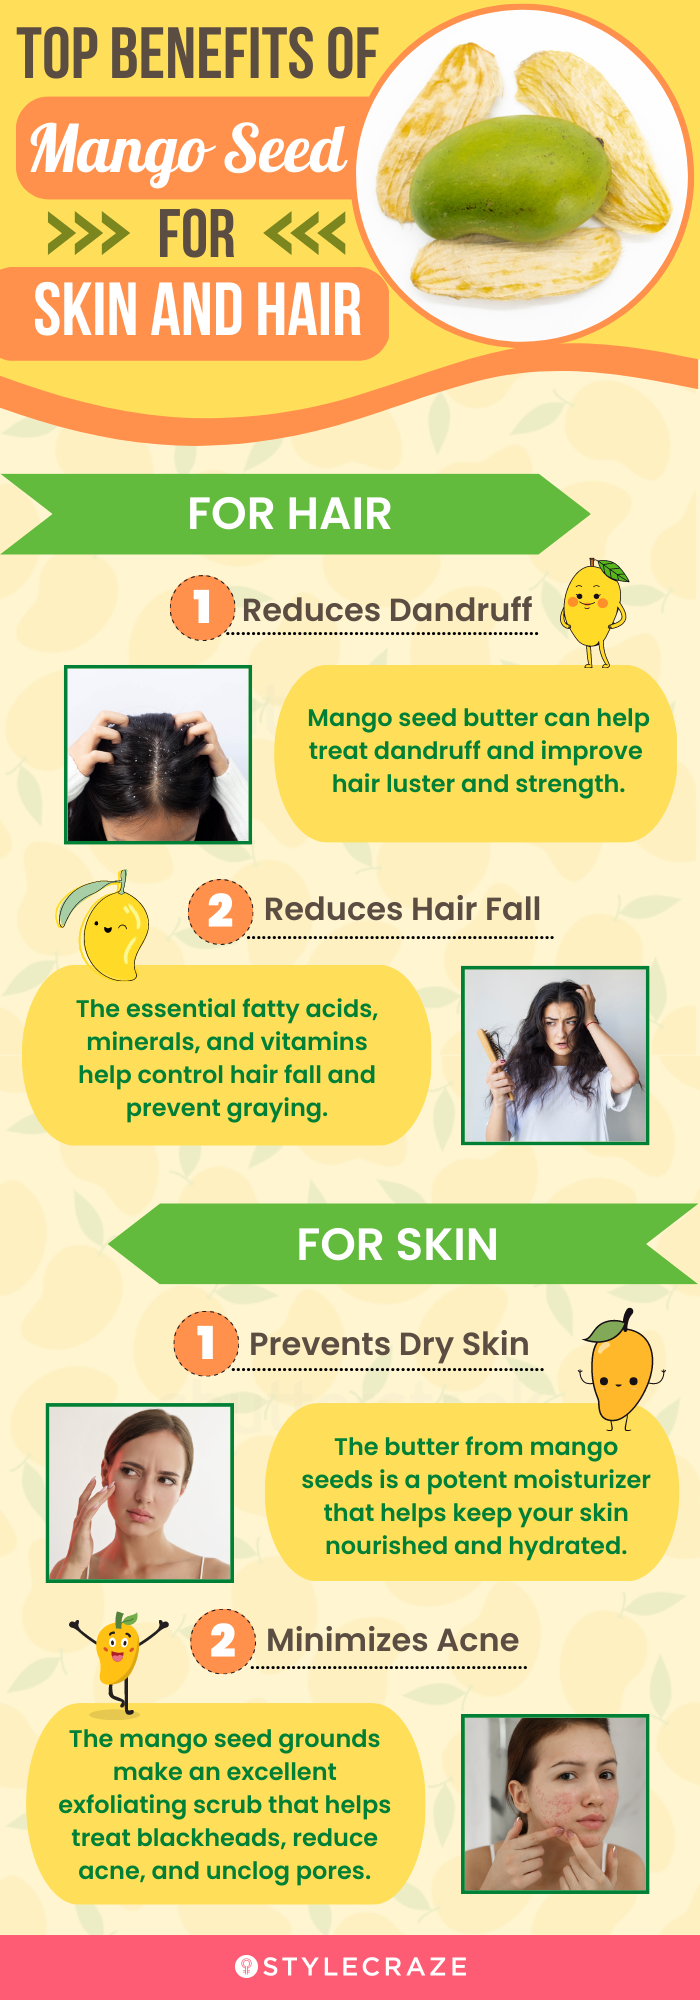 top benefits of mango seed for skin and hair (infographic)